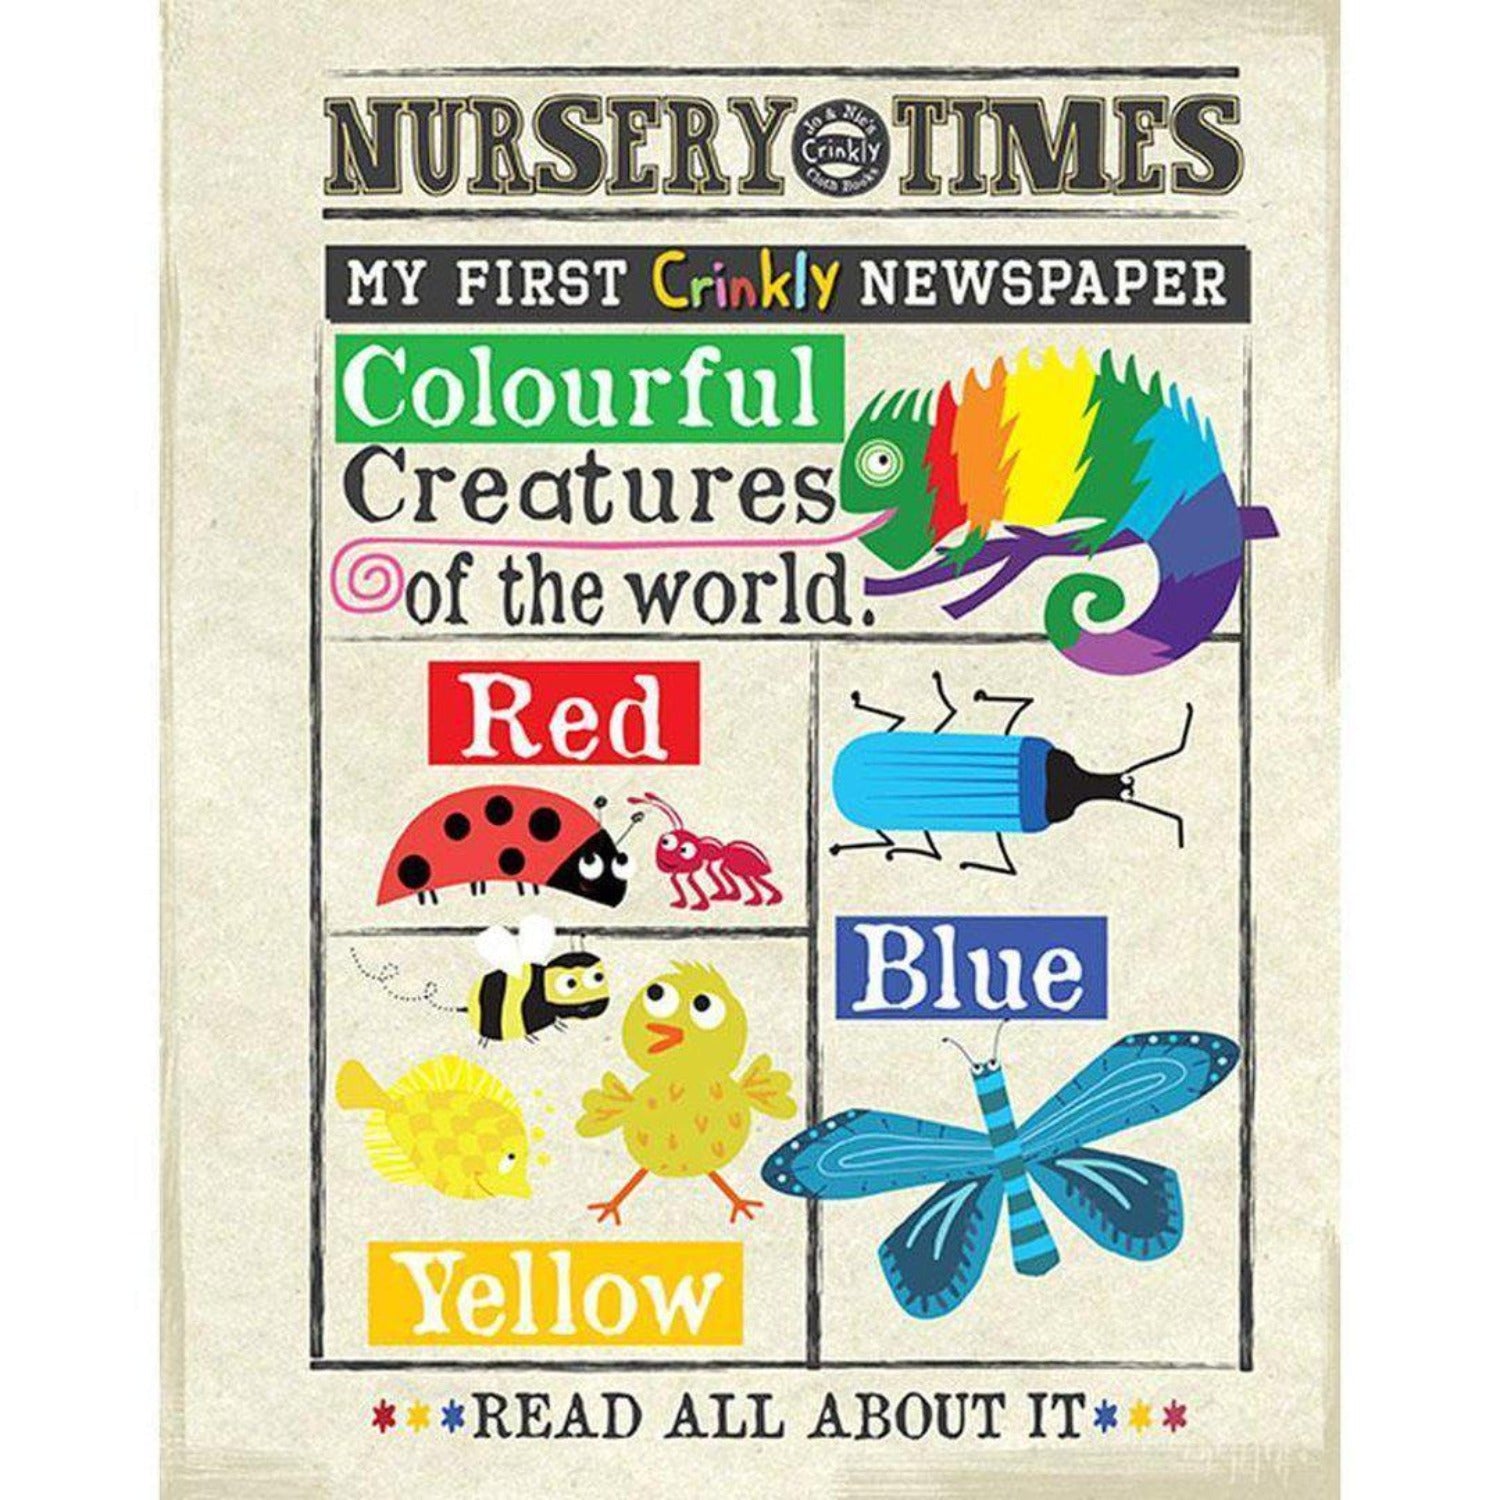 Nursery Times Newspaper - Colourful Creatures